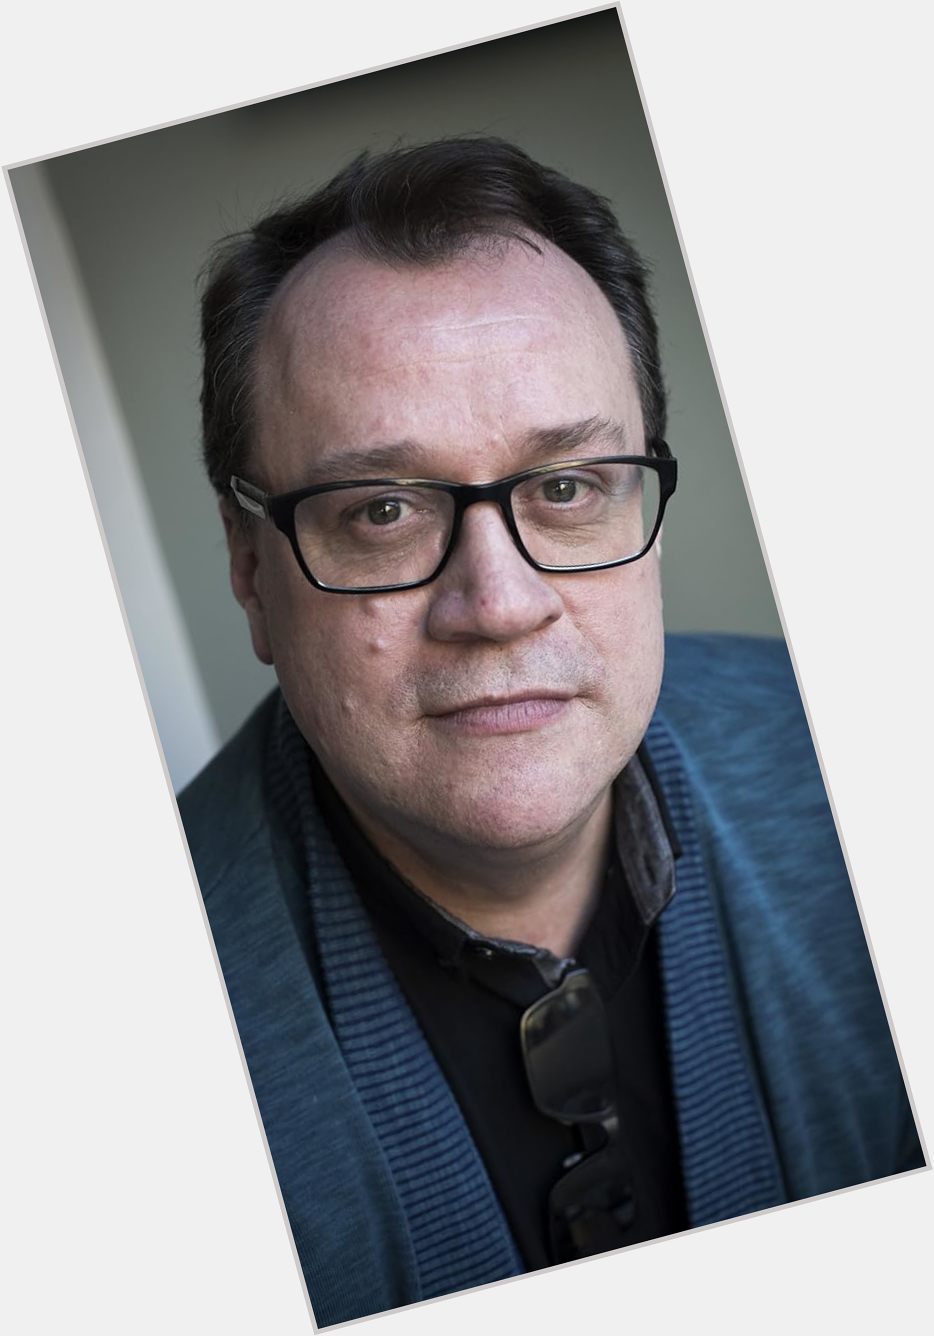 Http://fanpagepress.net/m/R/Russell T Davies New Pic 1